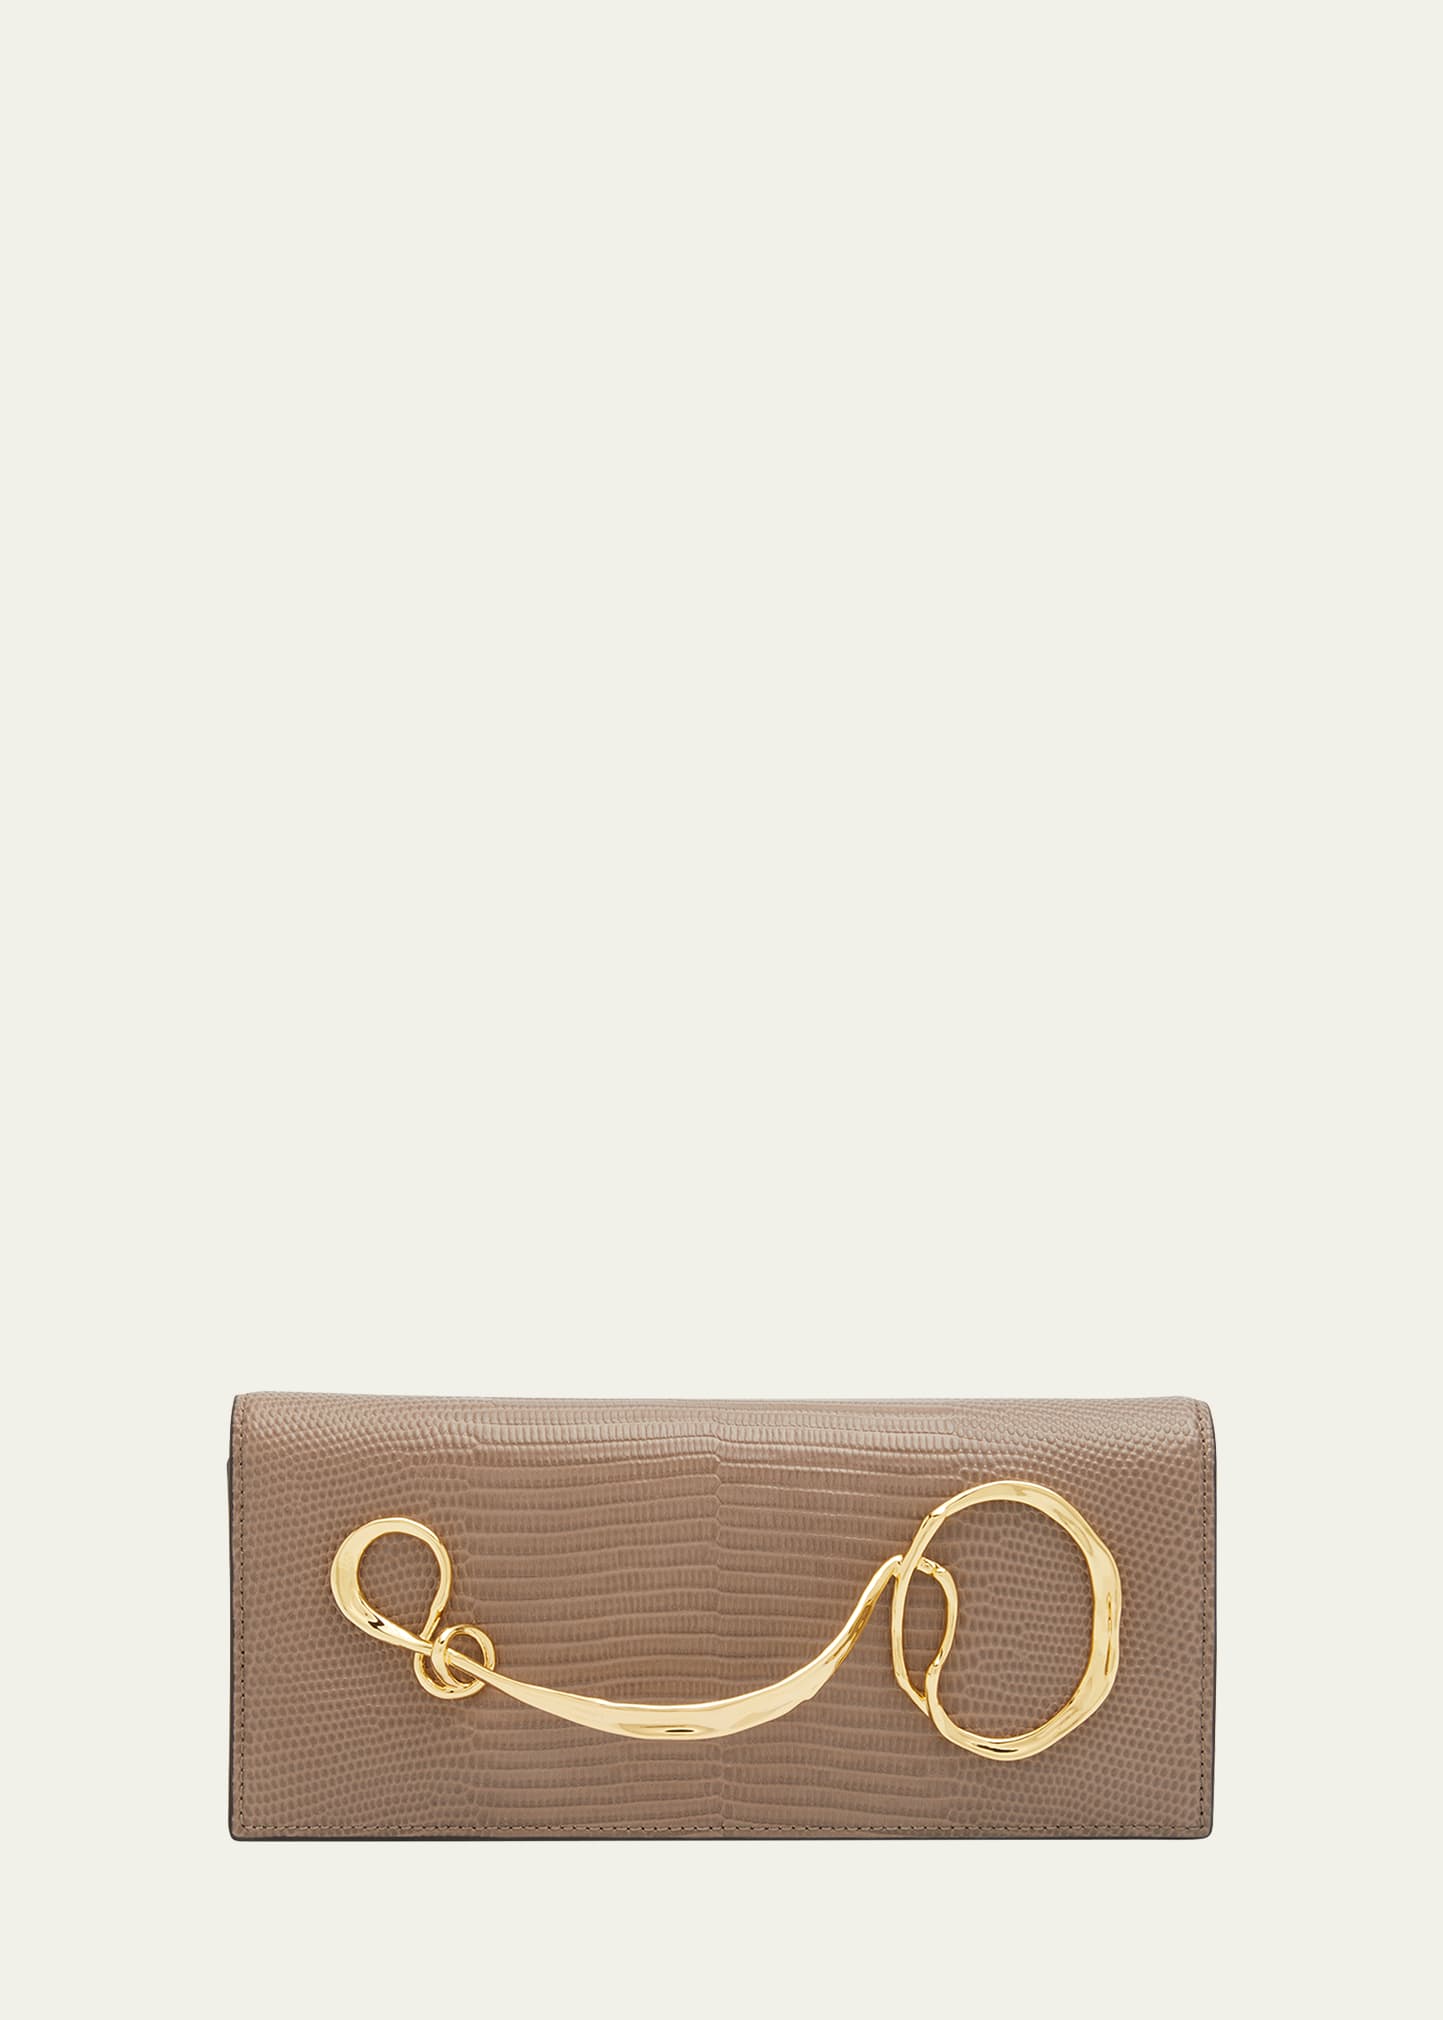 ALEXIS BITTAR TWISTED GOLD SIDE HANDLE CLUTCH PURSE